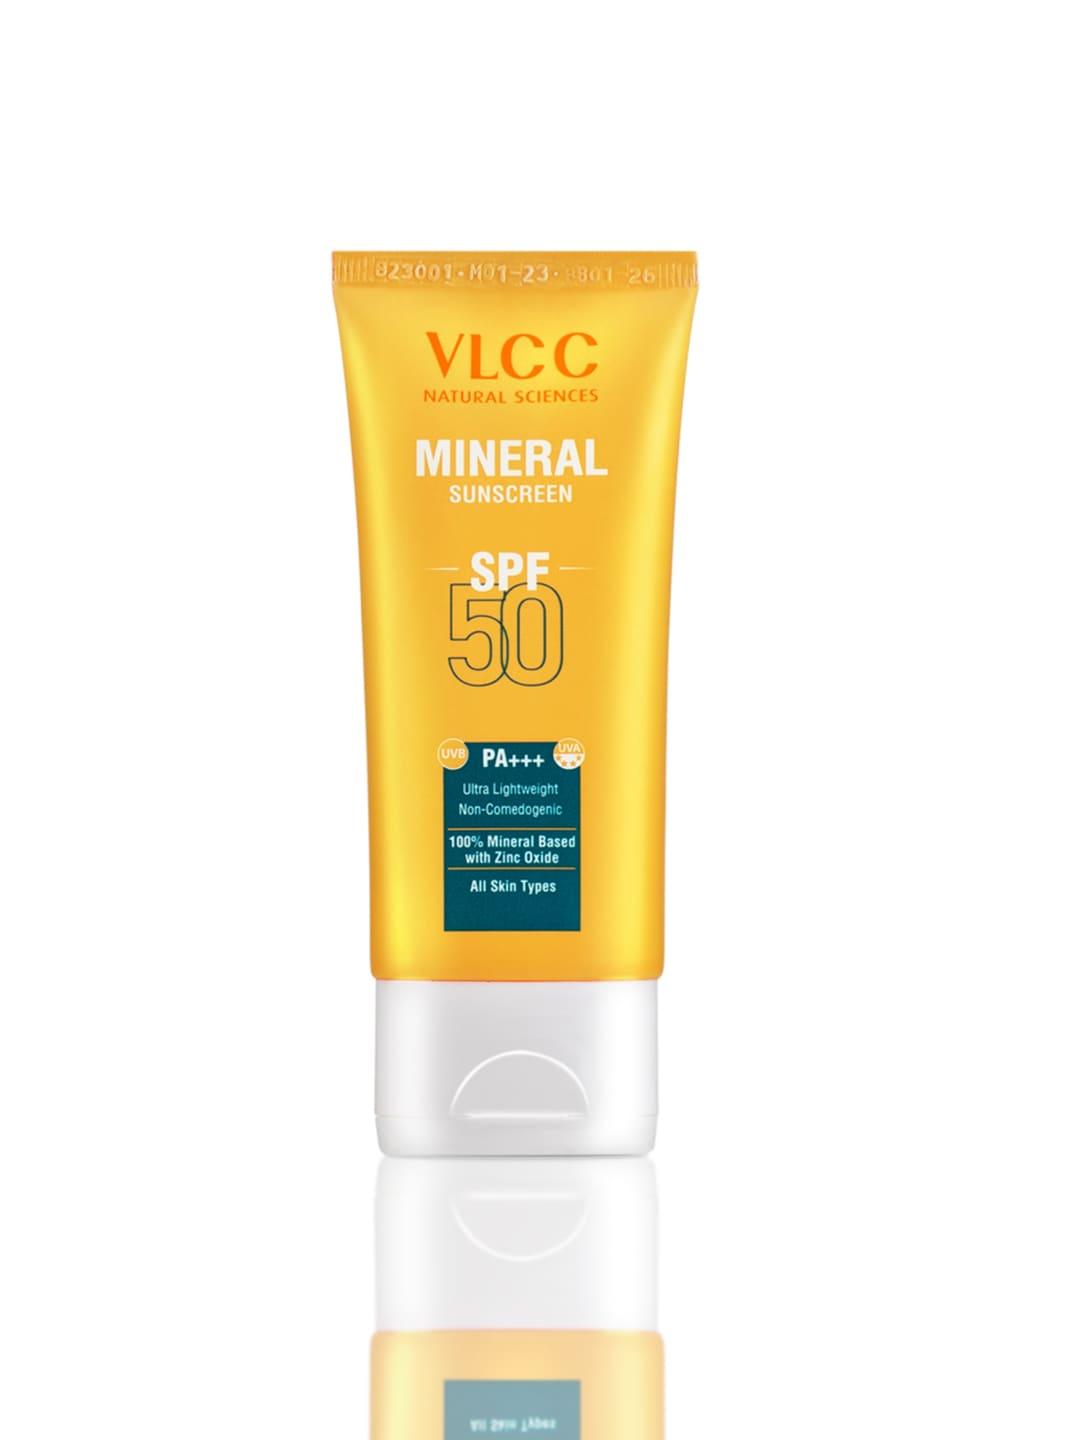 VLCC Natural Sciences Mineral SPF 50 Ultra Lightweight Non-Comedogenic Sunscreen - 50 g